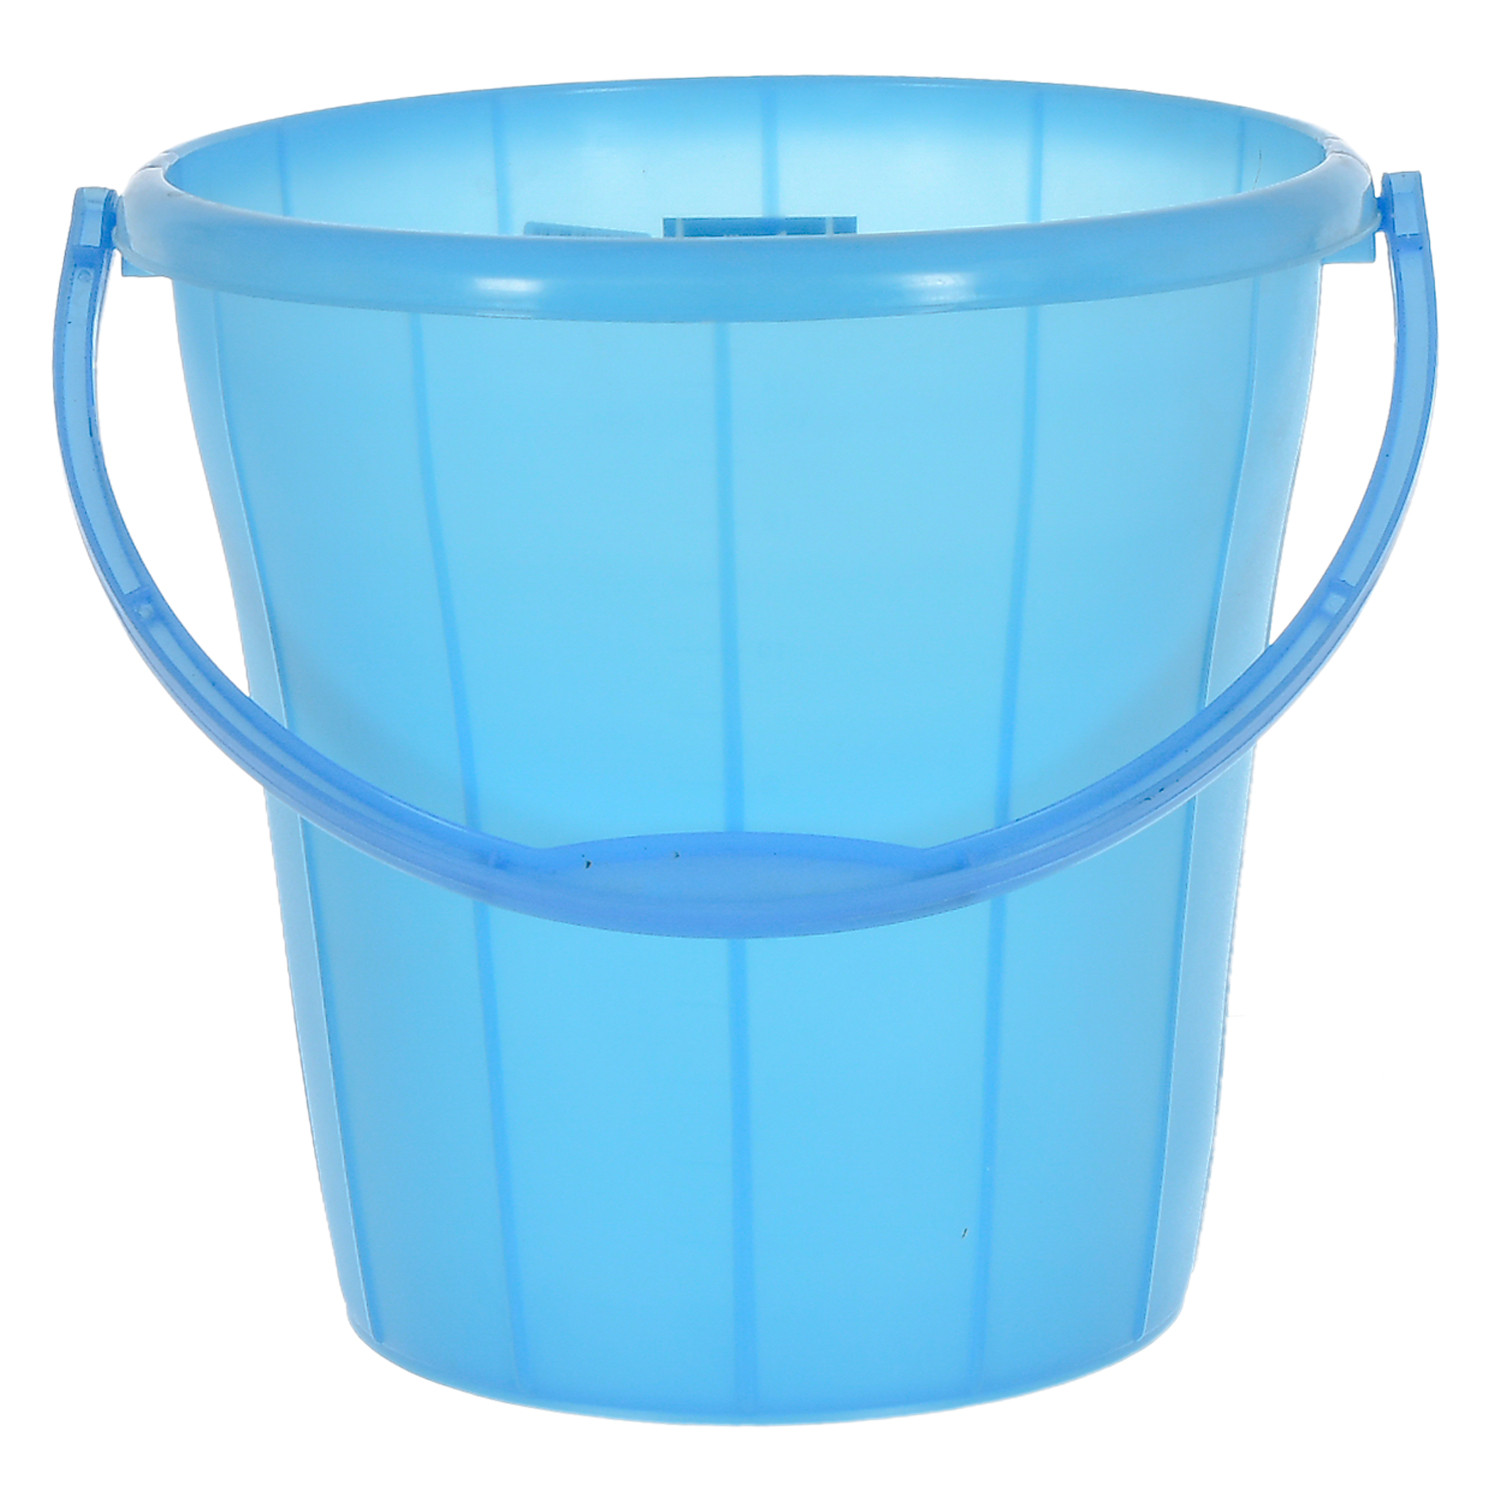 Kuber Industries Multiuses Plastic Bucket With Handle & Measuring Scale, 16 litre (Blue)-46KM0327